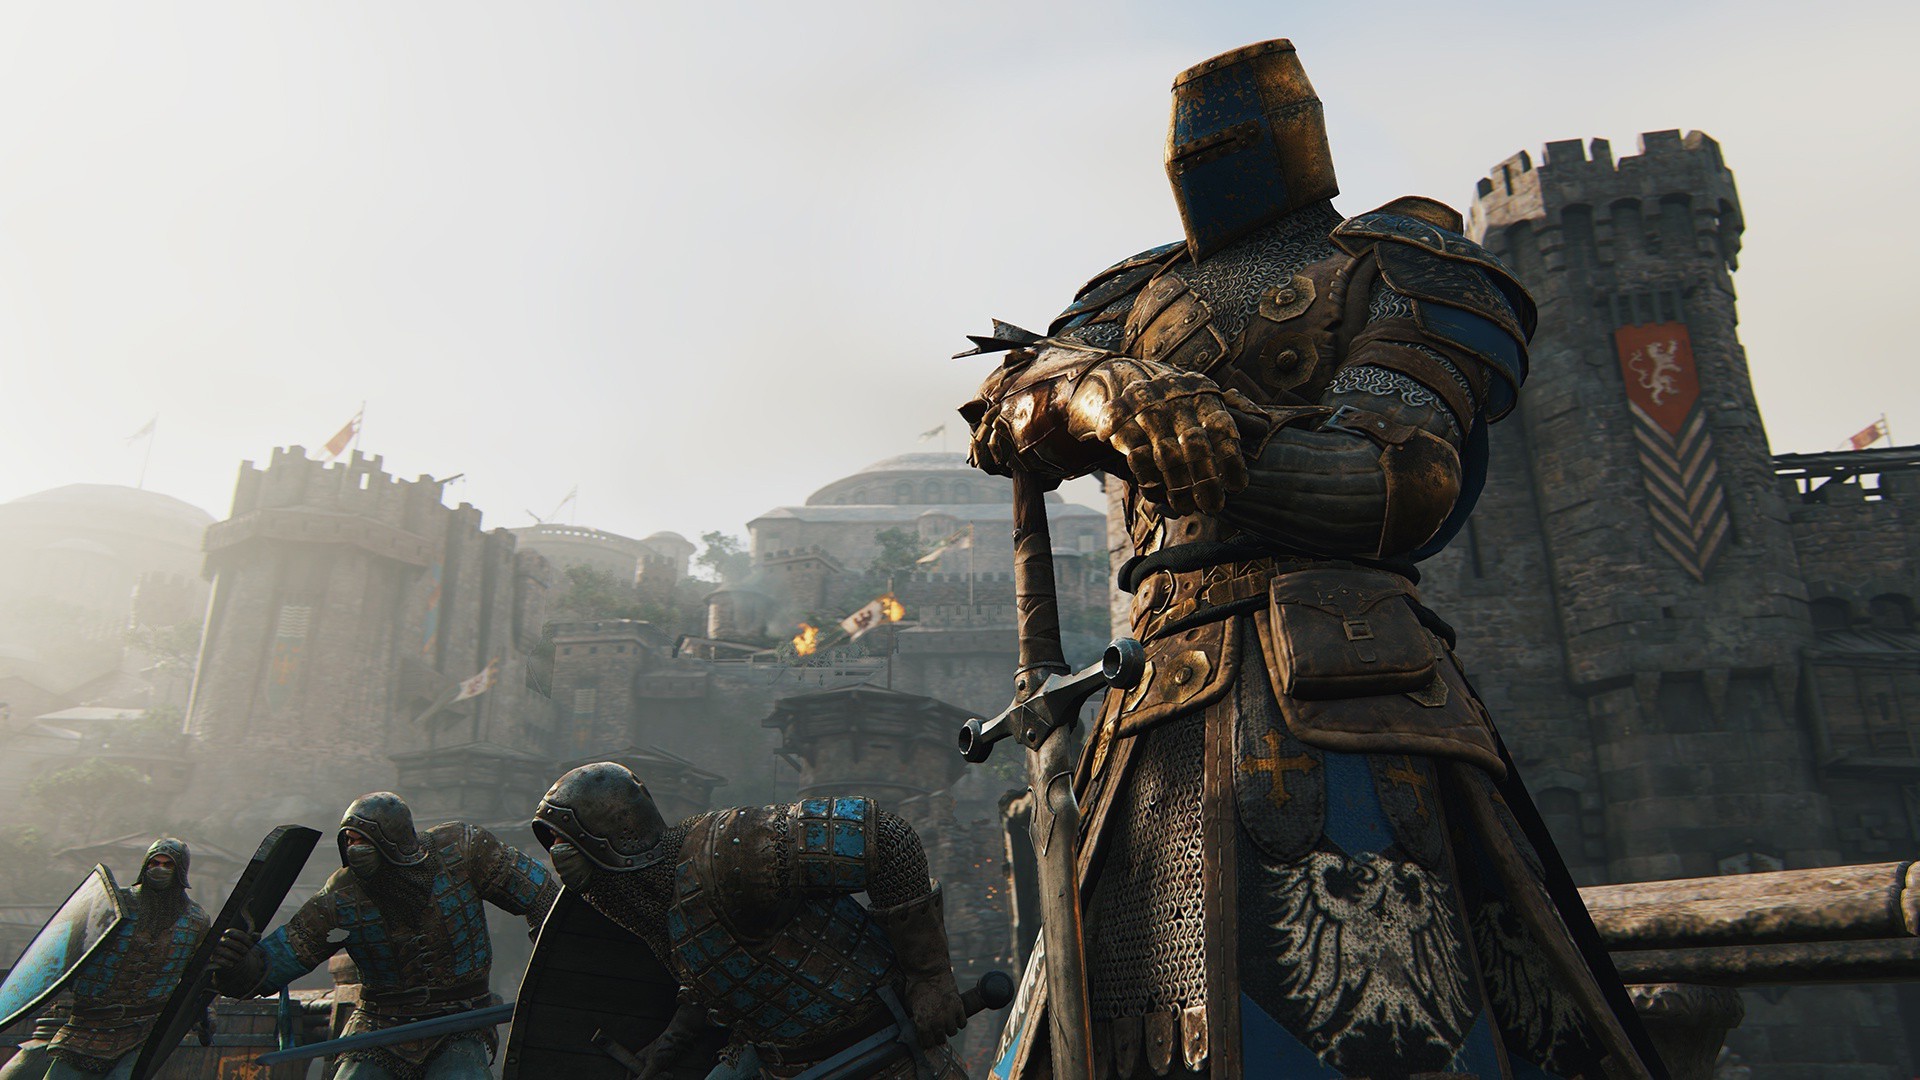 1920x1080 For Honor HD Wallpaper 17 - 1920 X 1080